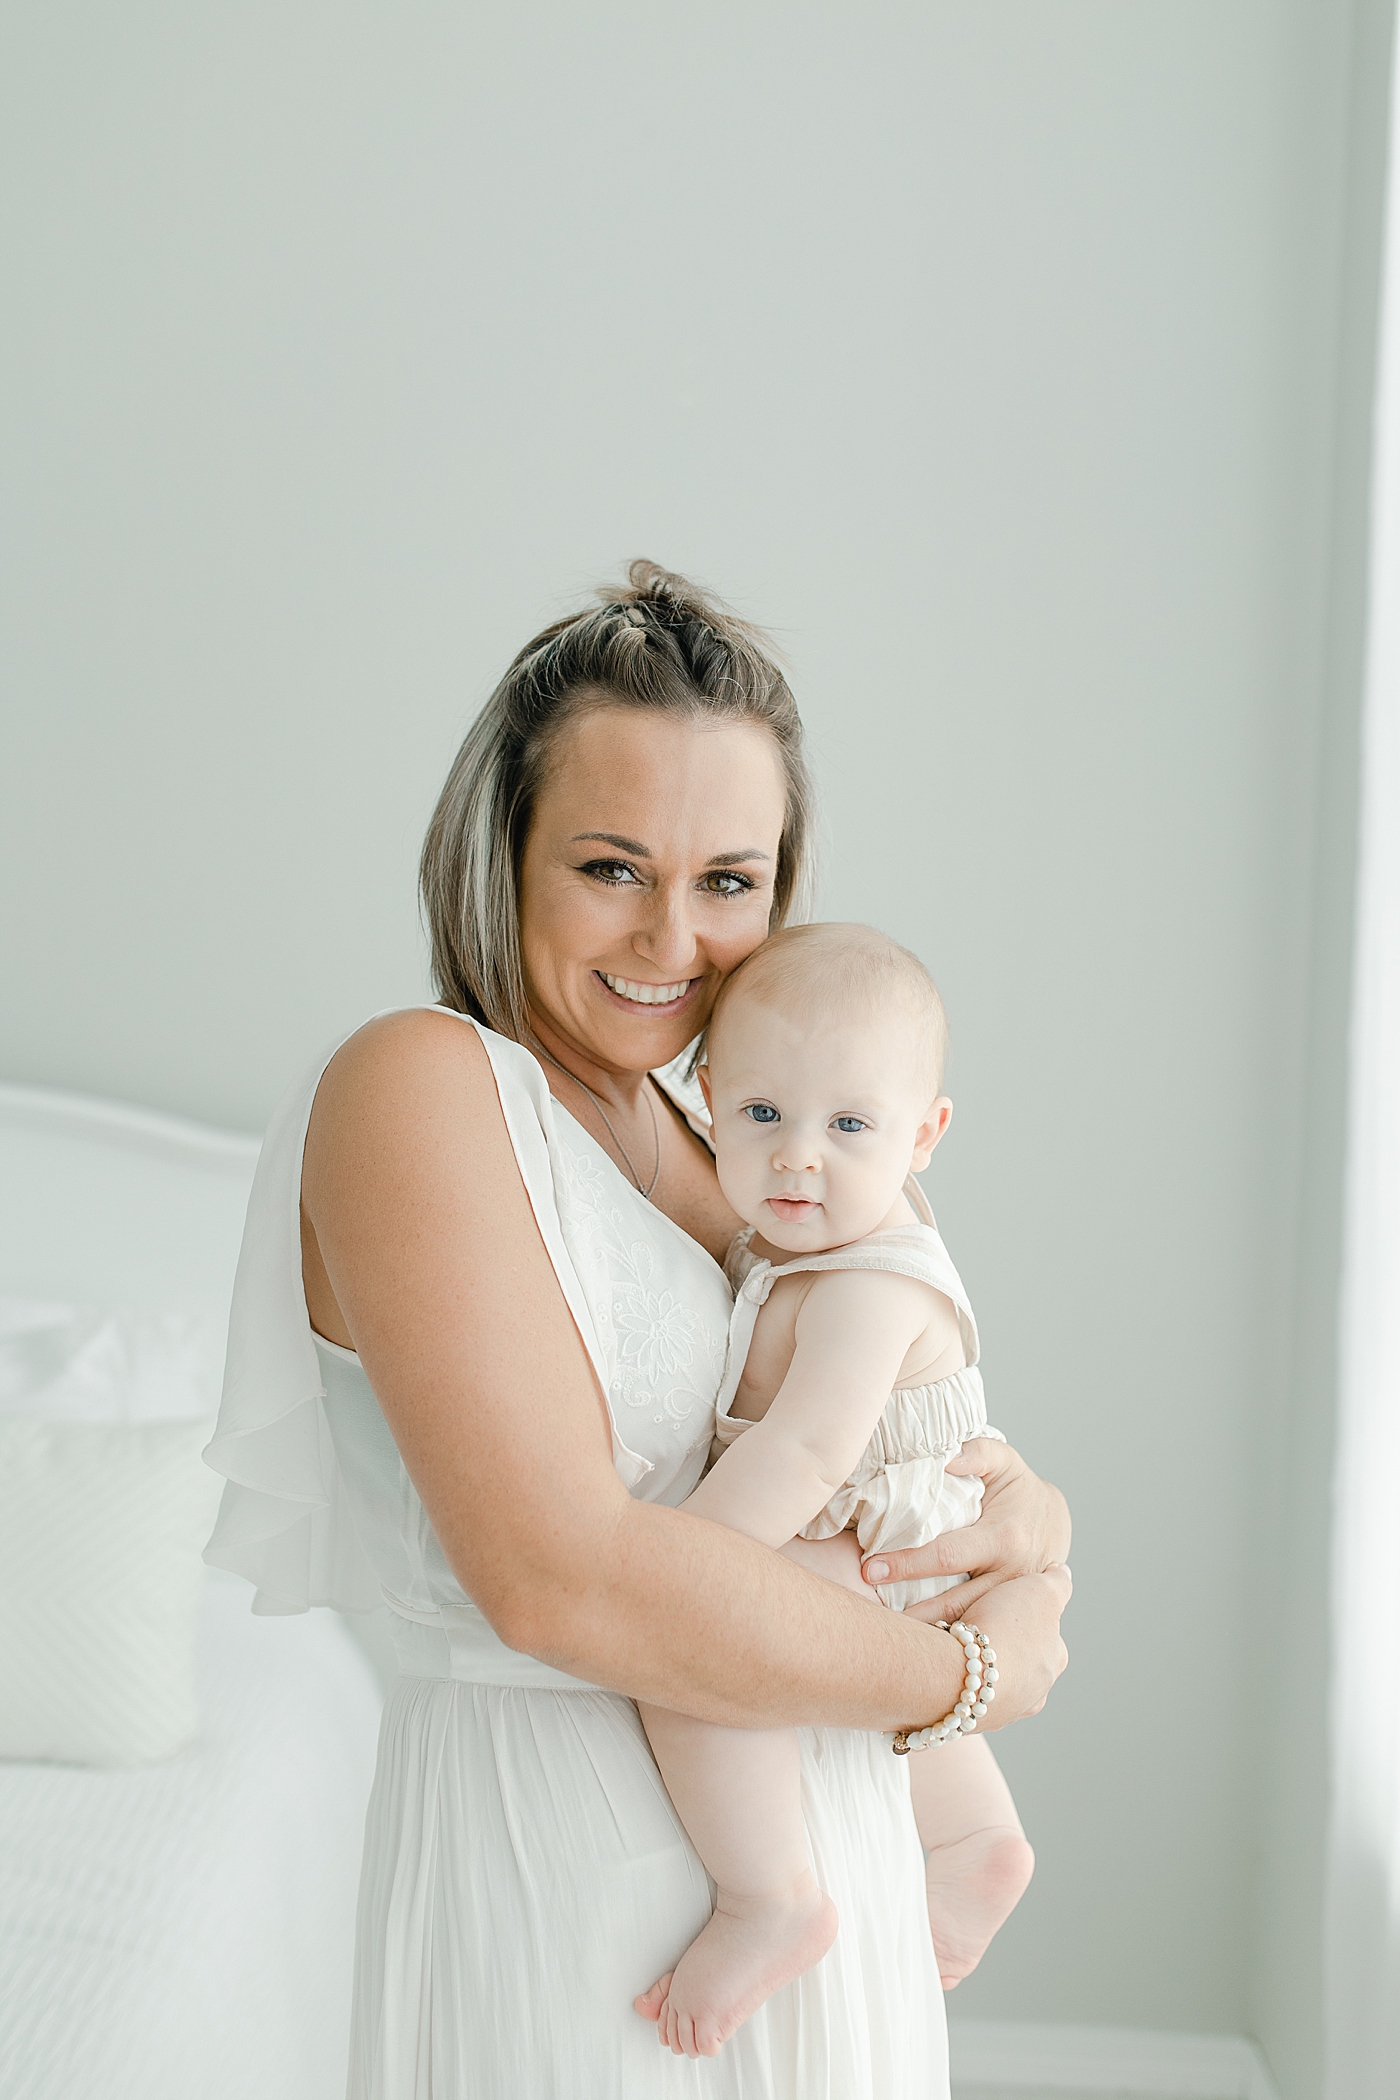 Mom in white dress snuggling with her baby boy | Photo by Hattiesburg Baby Photographer Little Sunshine Photography